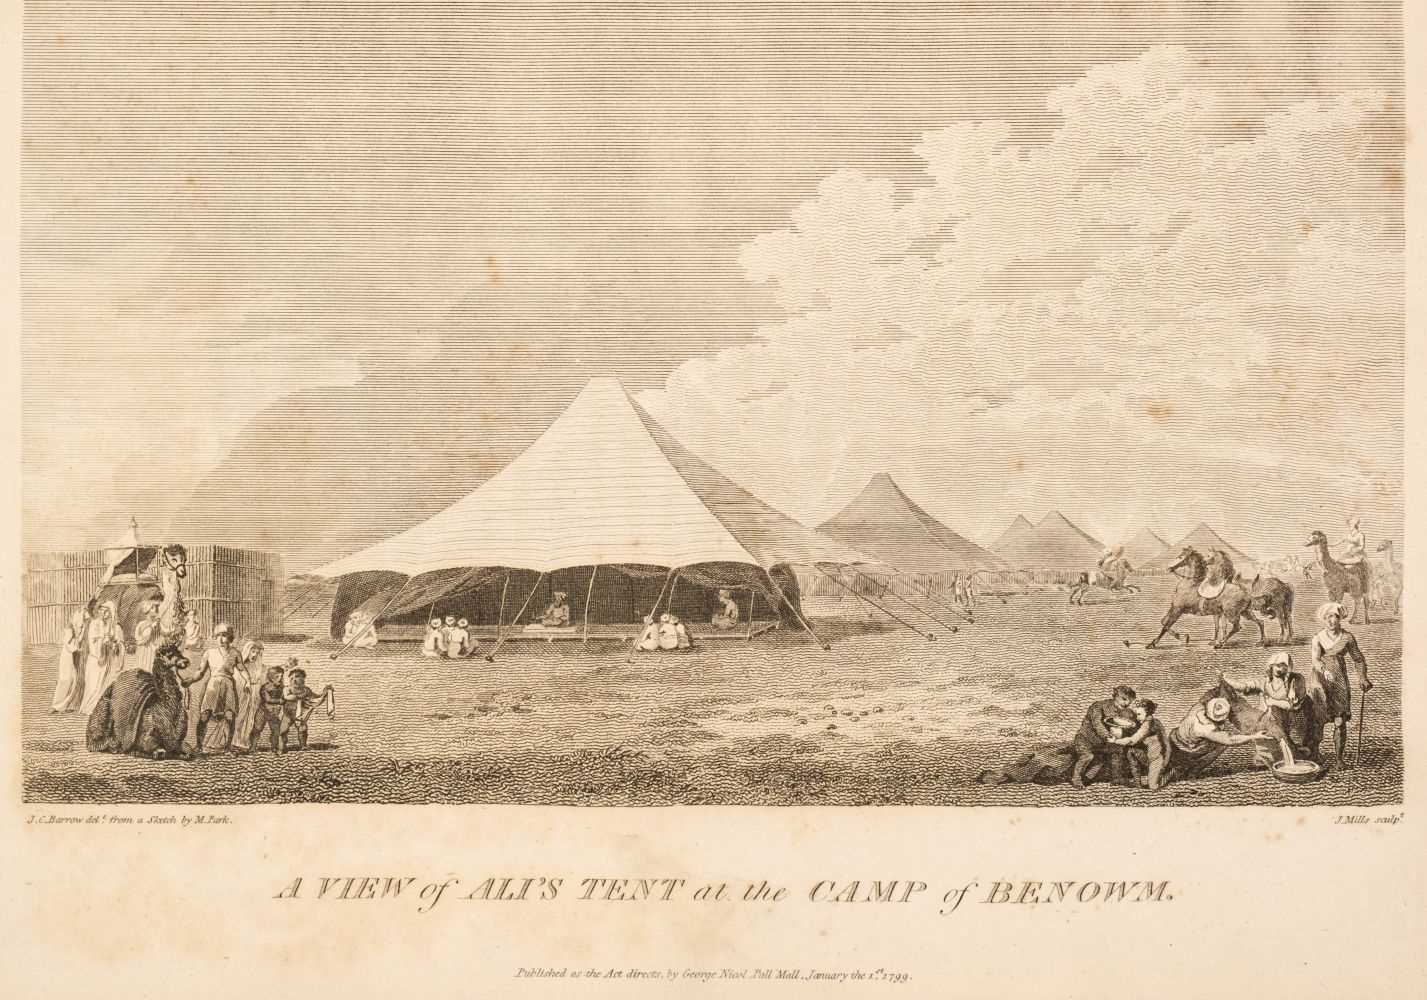 Lot 18 - Park (Mungo). Travels in the Interior Districts of Africa, 2nd edition, 1799